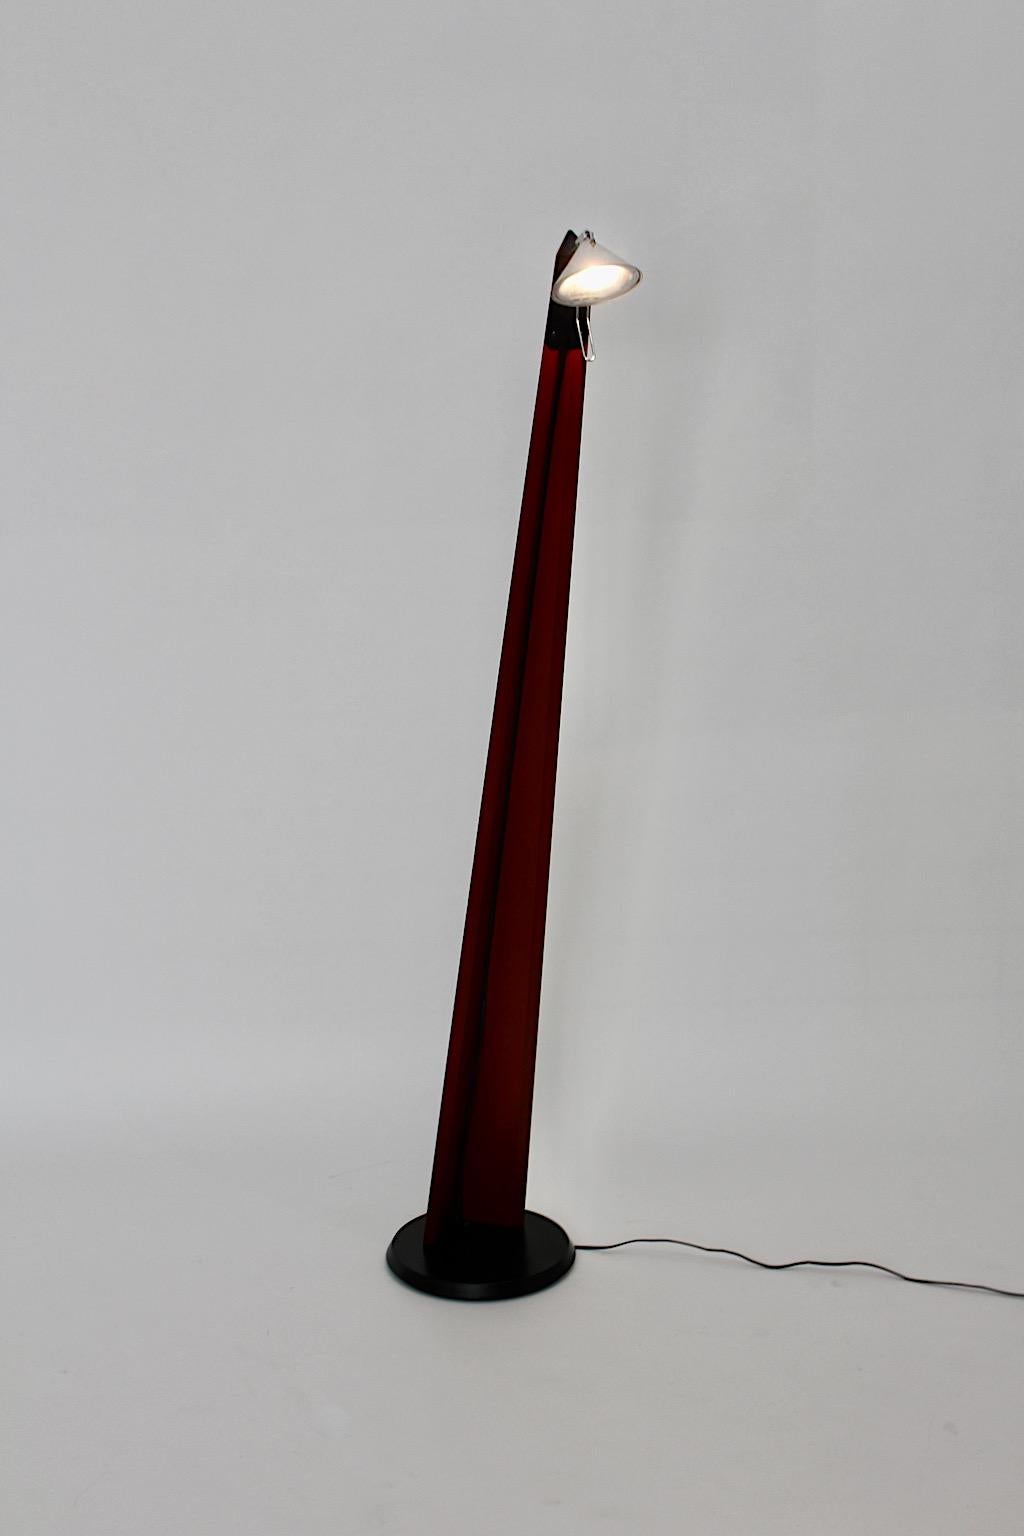 Scandinavian Modern Vintage Floor Lamp Plastic Chrome, 1980s In Good Condition For Sale In Vienna, AT